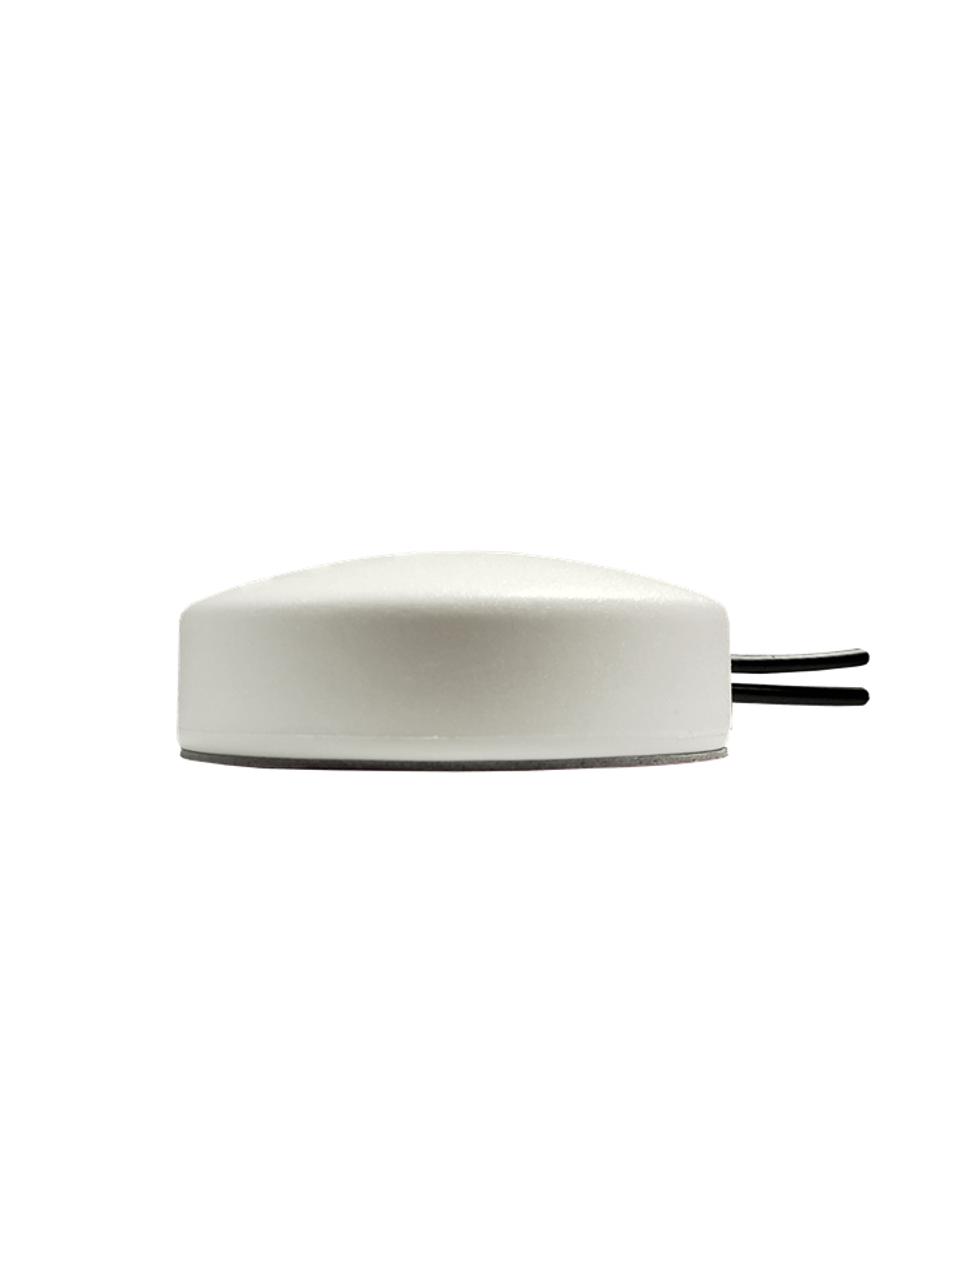 M400 2-Lead MIMO Cellular 3G 4G 5G LTE Adhesive Mount M2M IoT Antenna for Inseego SKYUS-DS2 Modem